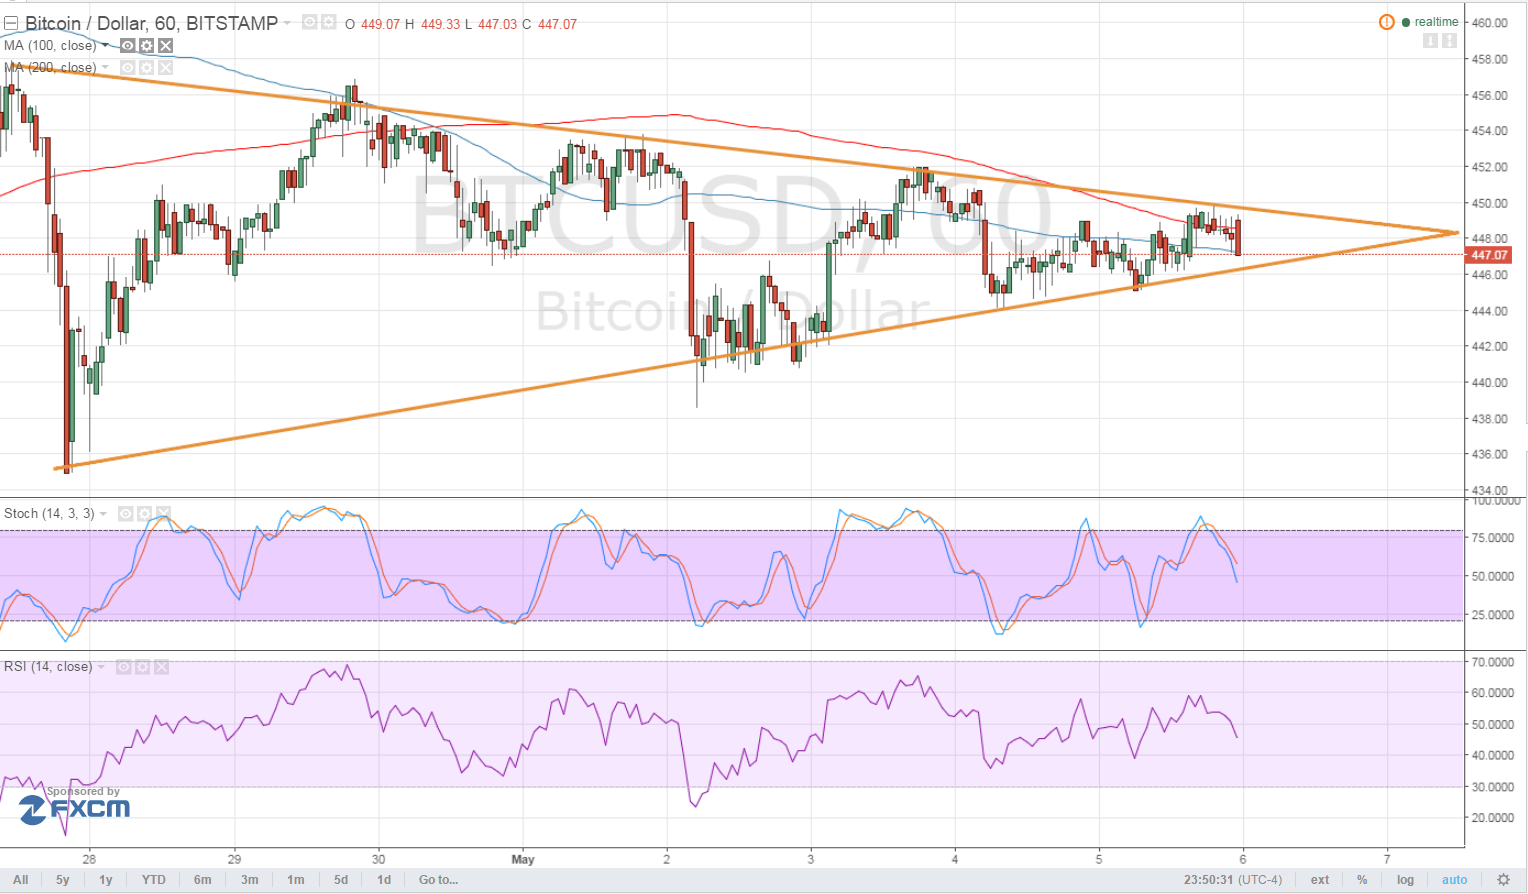 Bitcoin Price Technical Analysis for 05/06/2016 - Strong Breakout Looming?